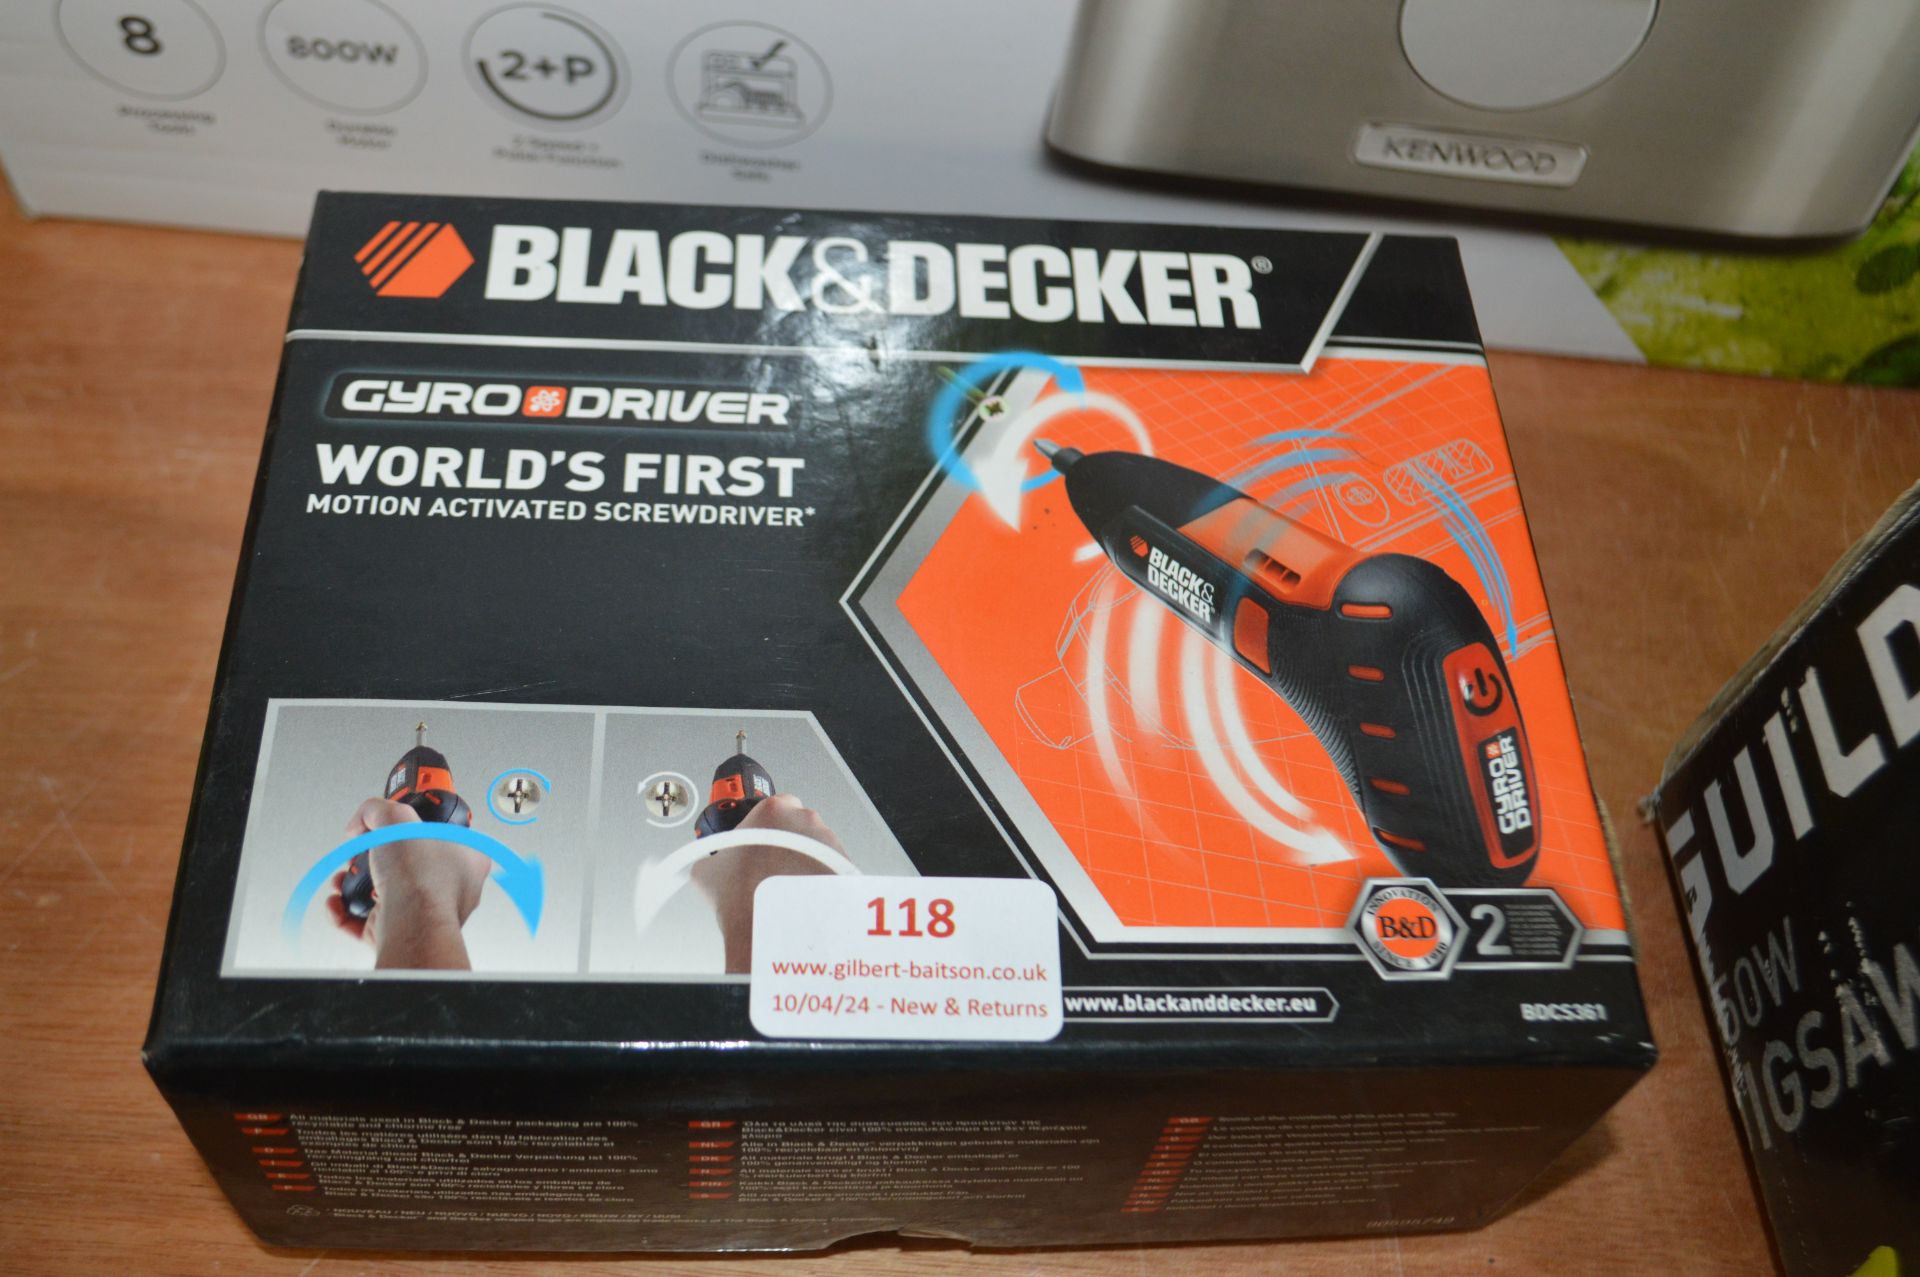 Black & Decker Gyro Driver Motion Activated Screwdriver